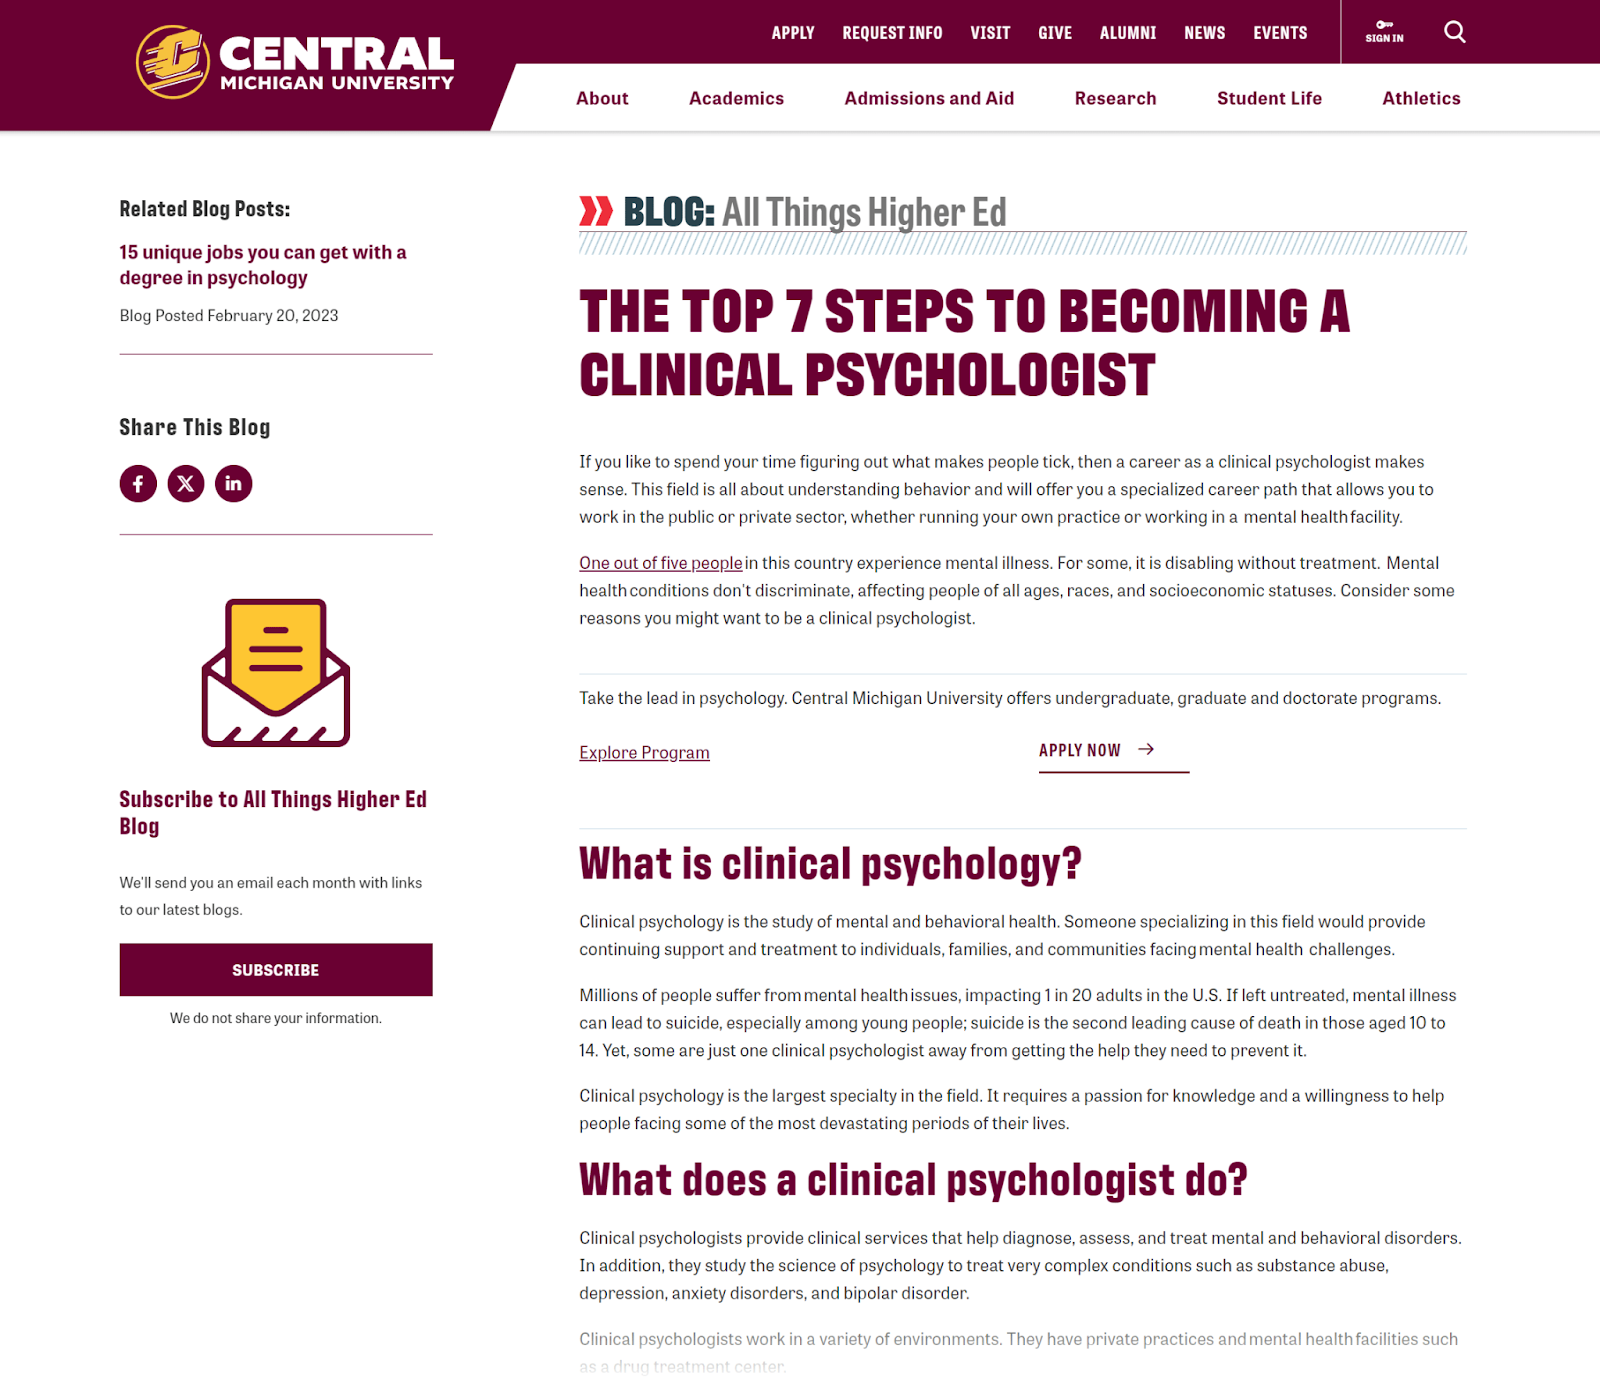 Central Michigan University blog post on steps to becoming a clinical psychologist.